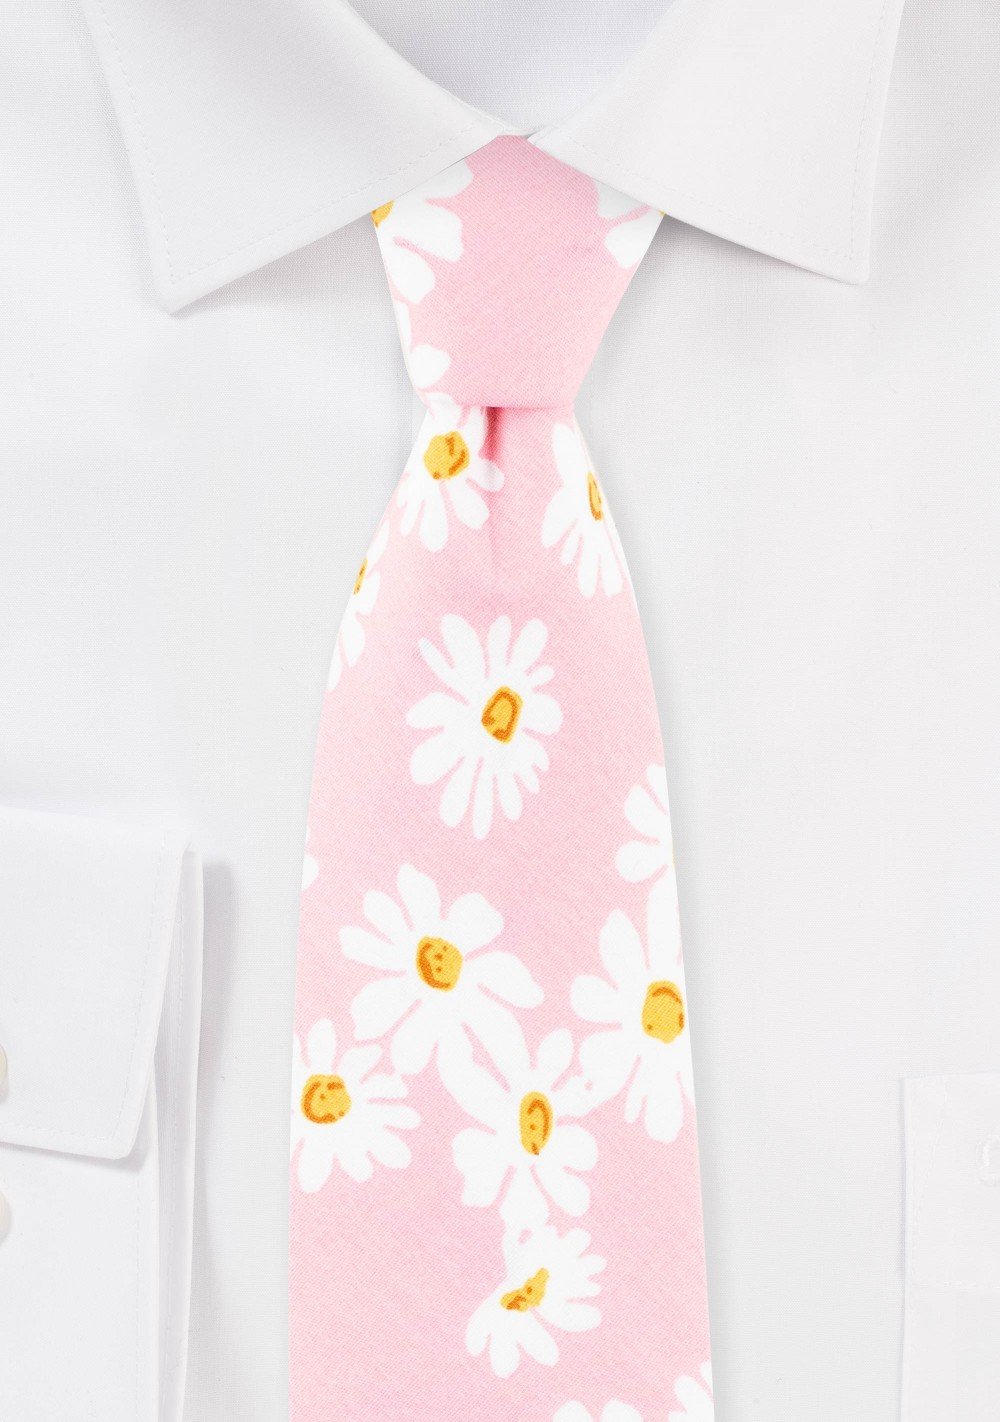 Tie Neck tie Slim White  with Pink & Teal Floral Quality Cotton T6123 